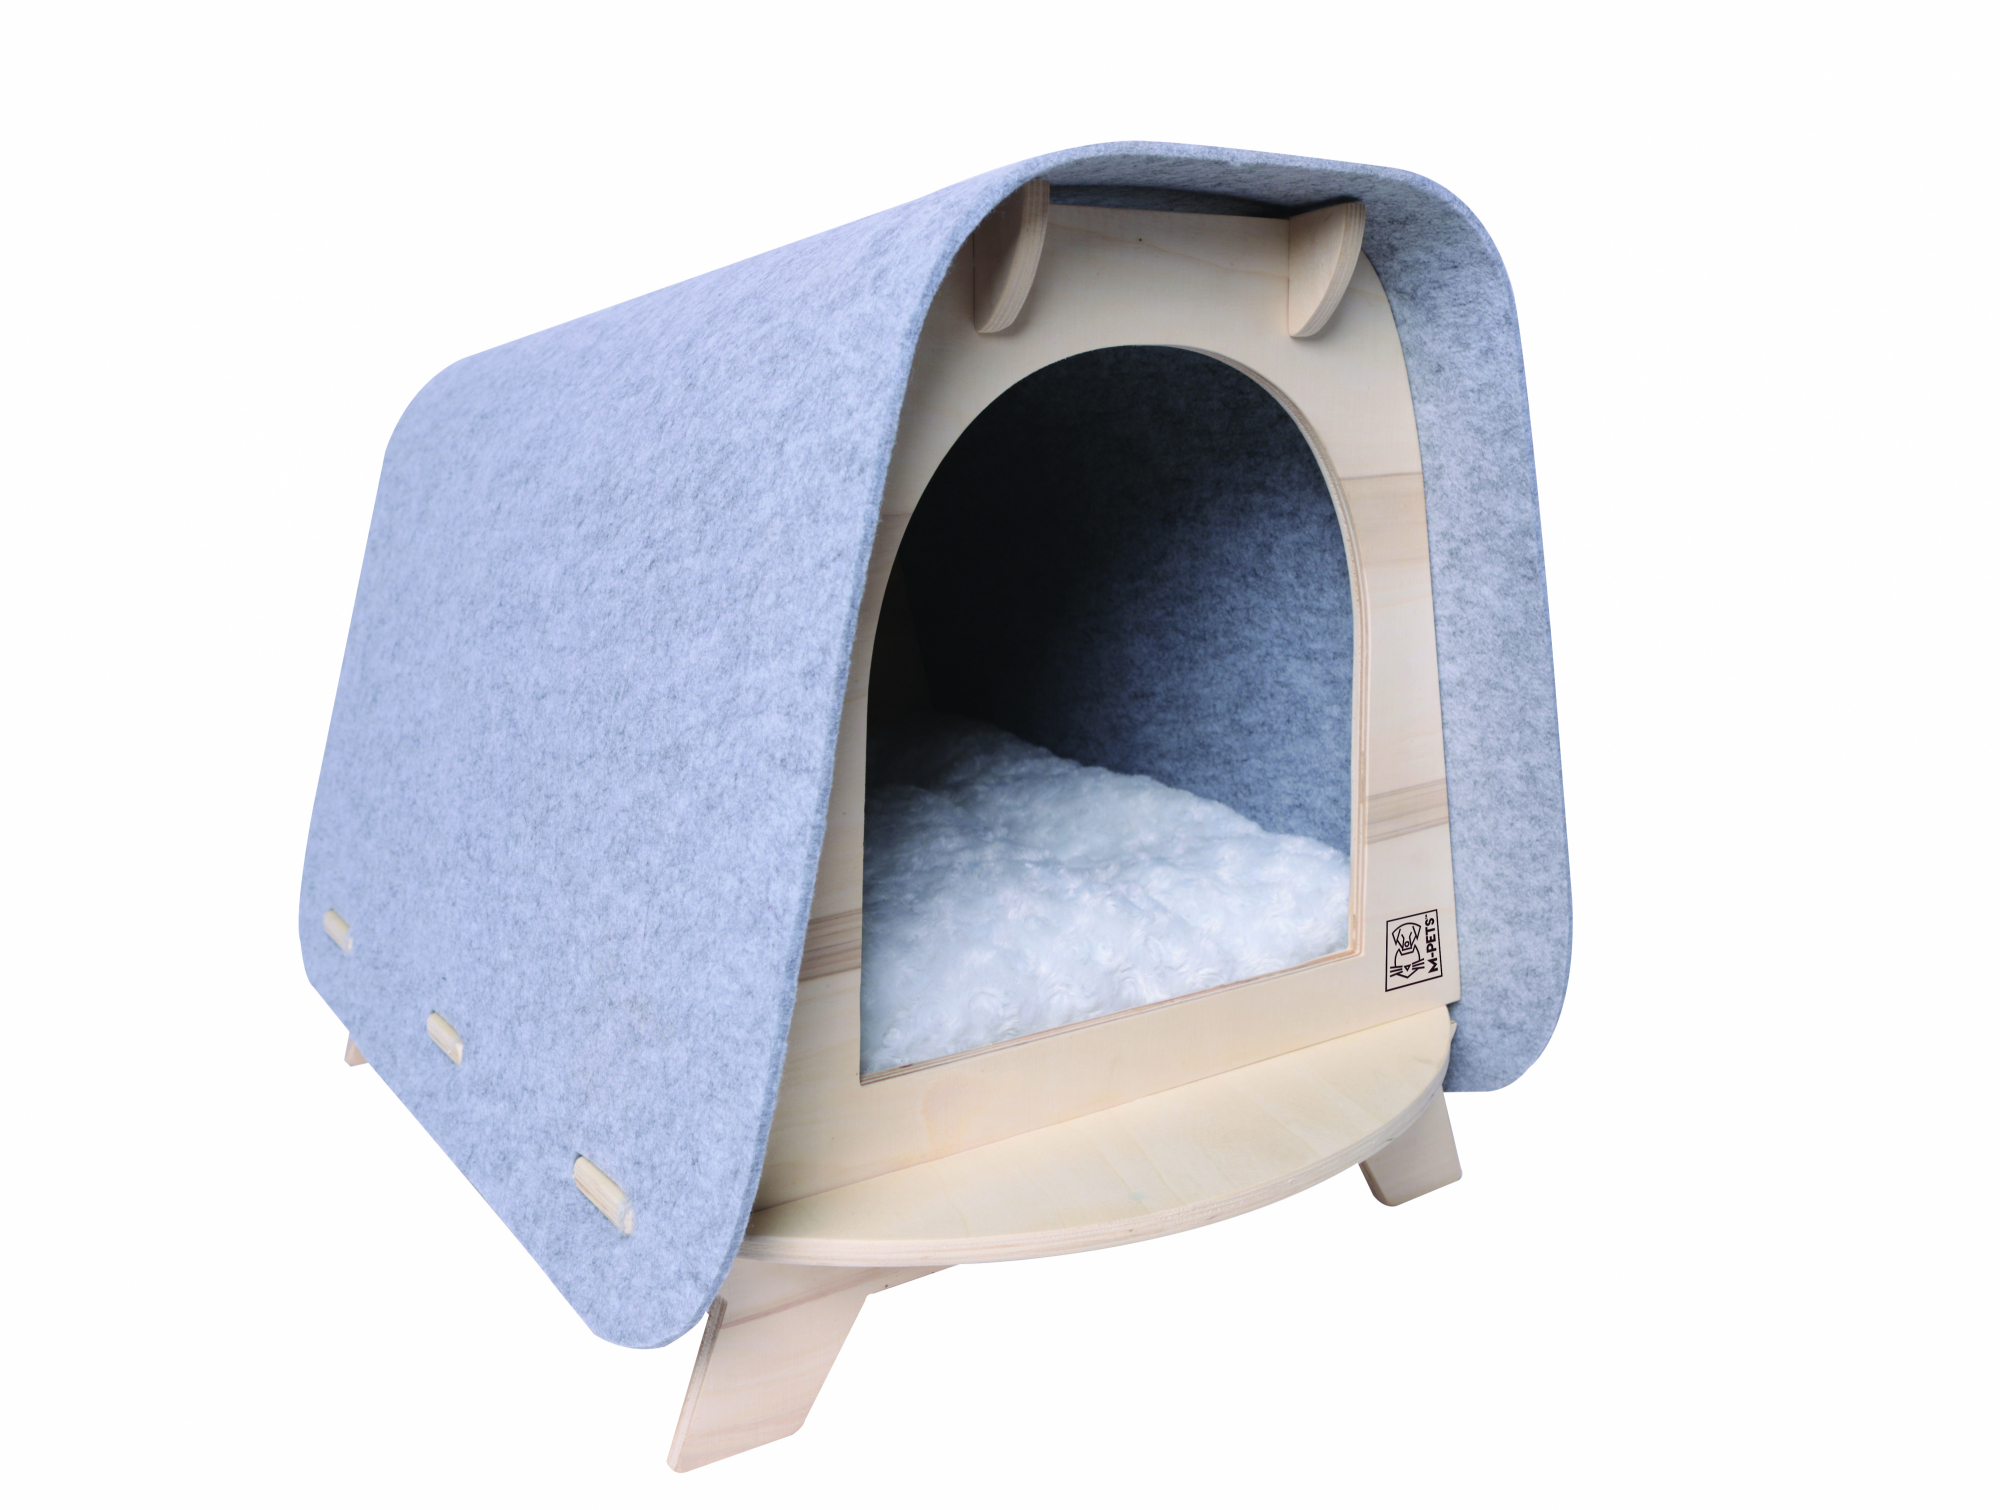 Niche pour chat Woody Cozy